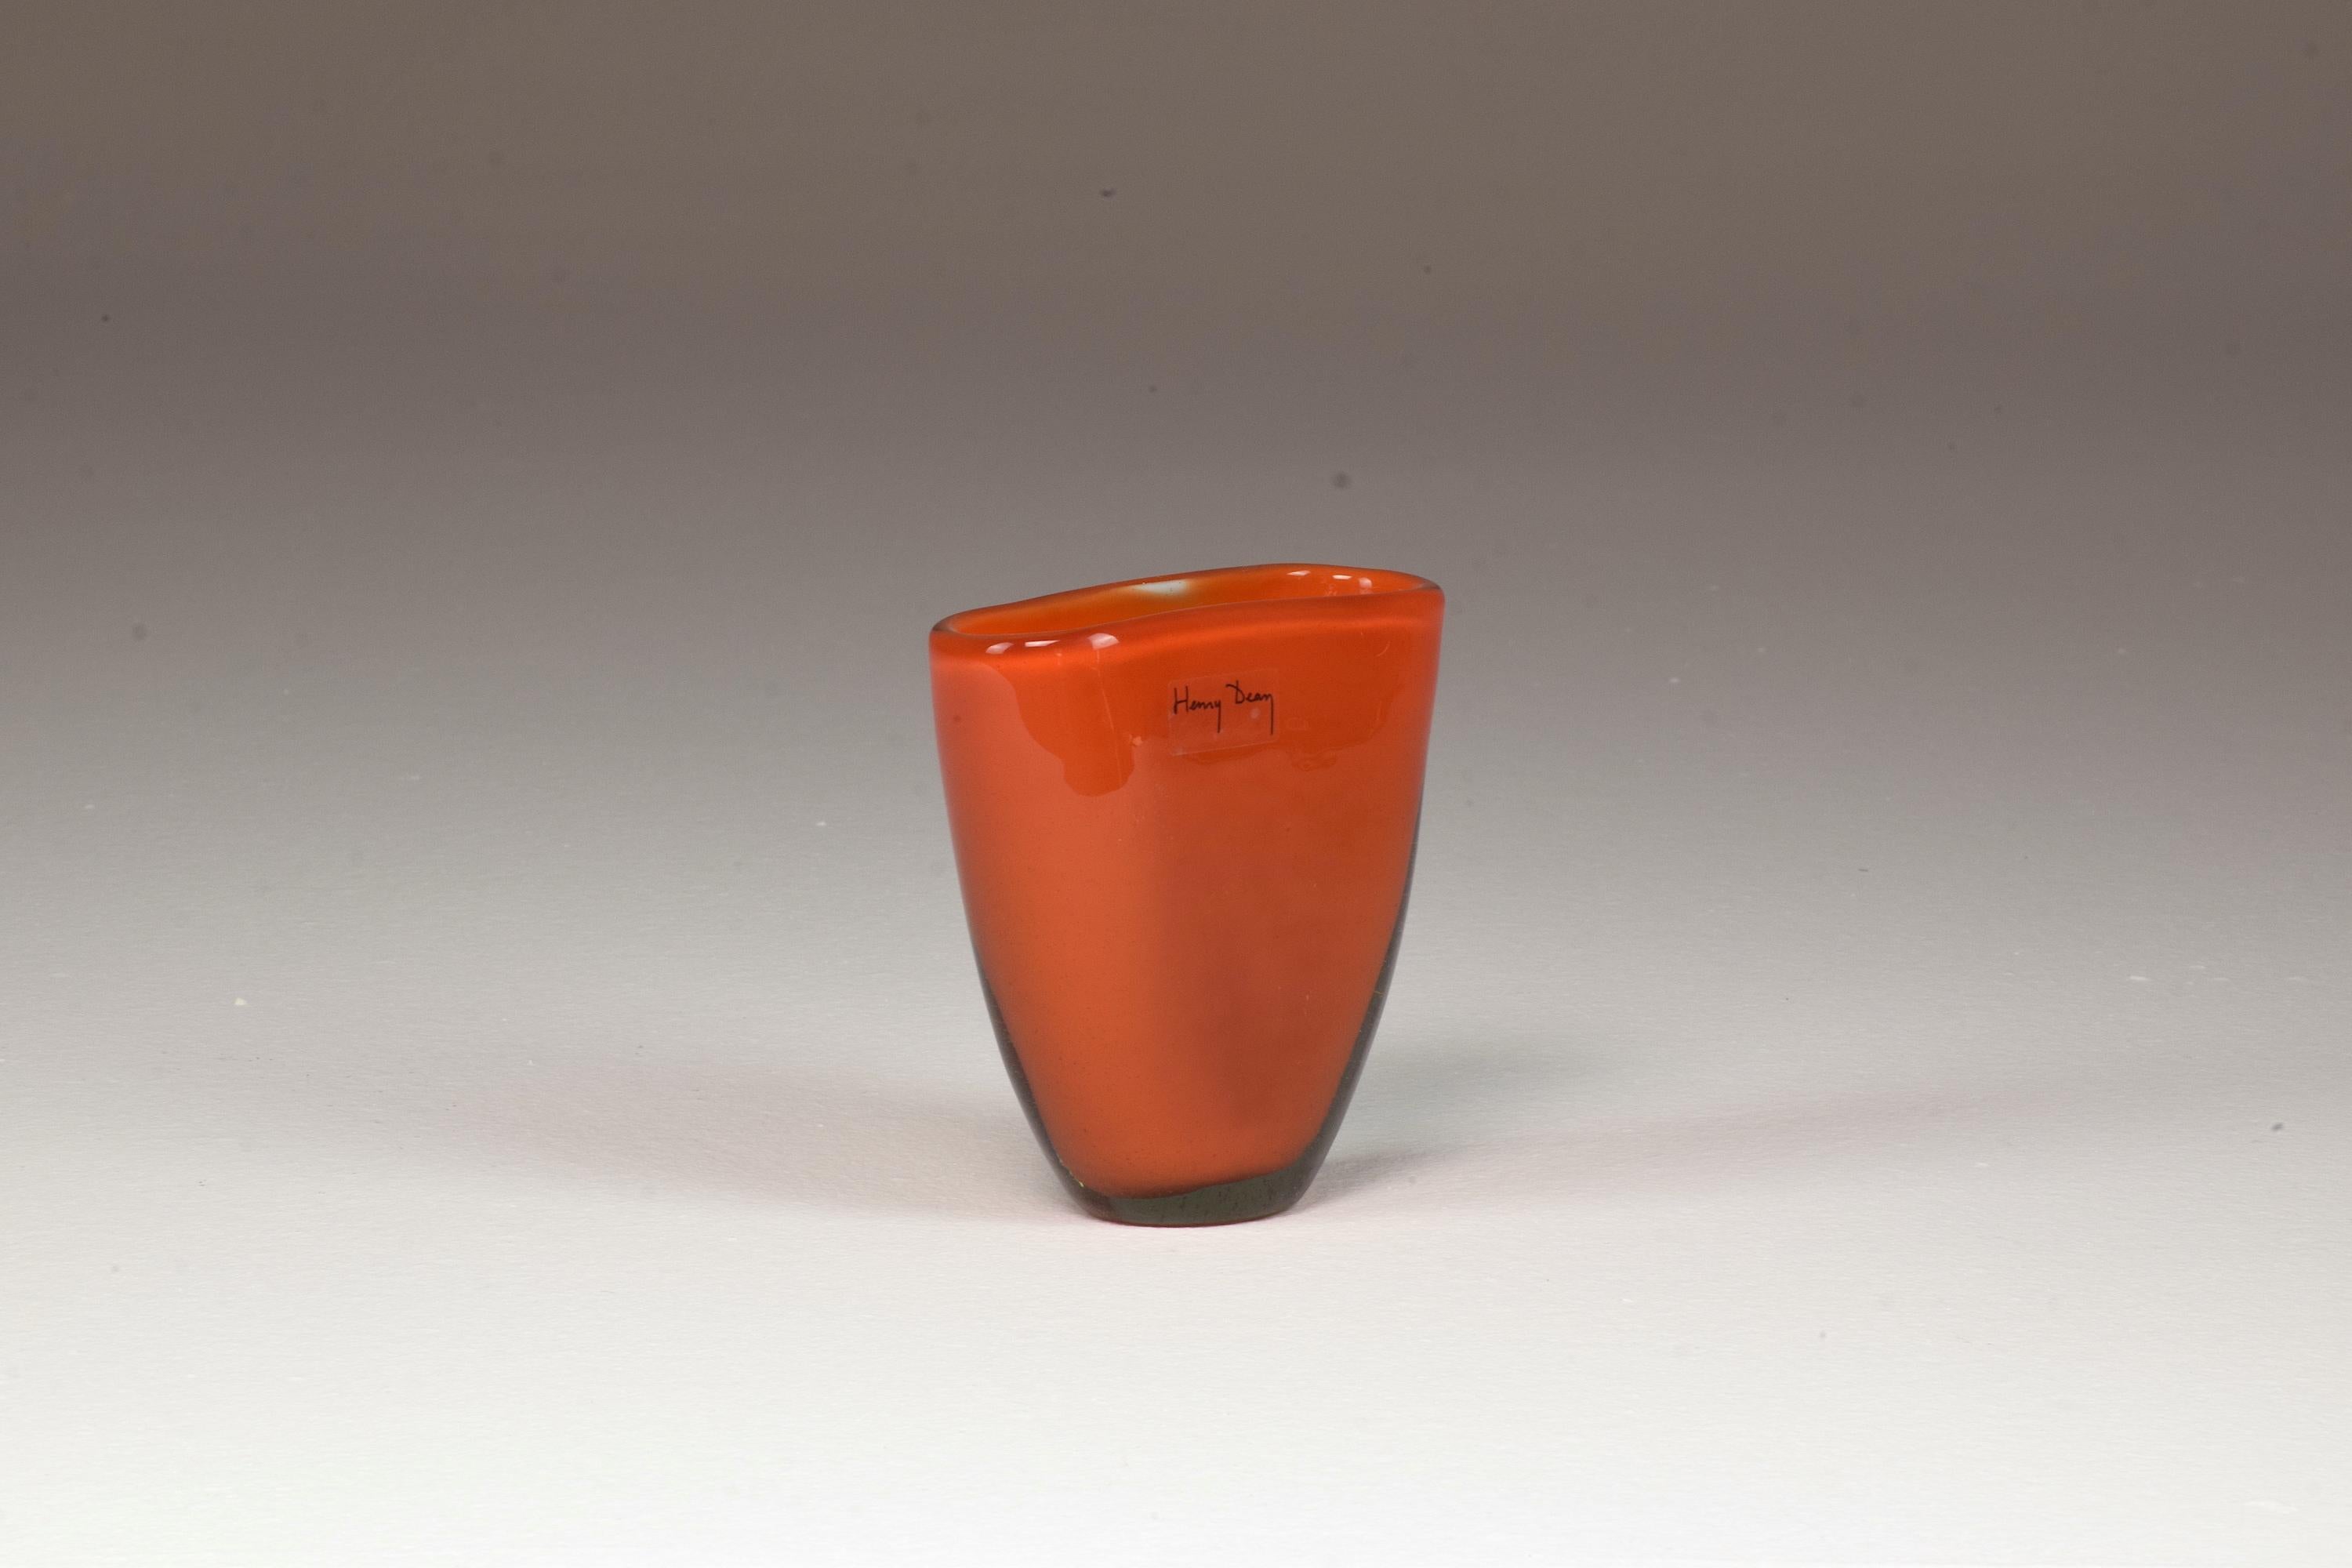 A 20th century vintage small English glass vase by Henry Dean circa 1970's.